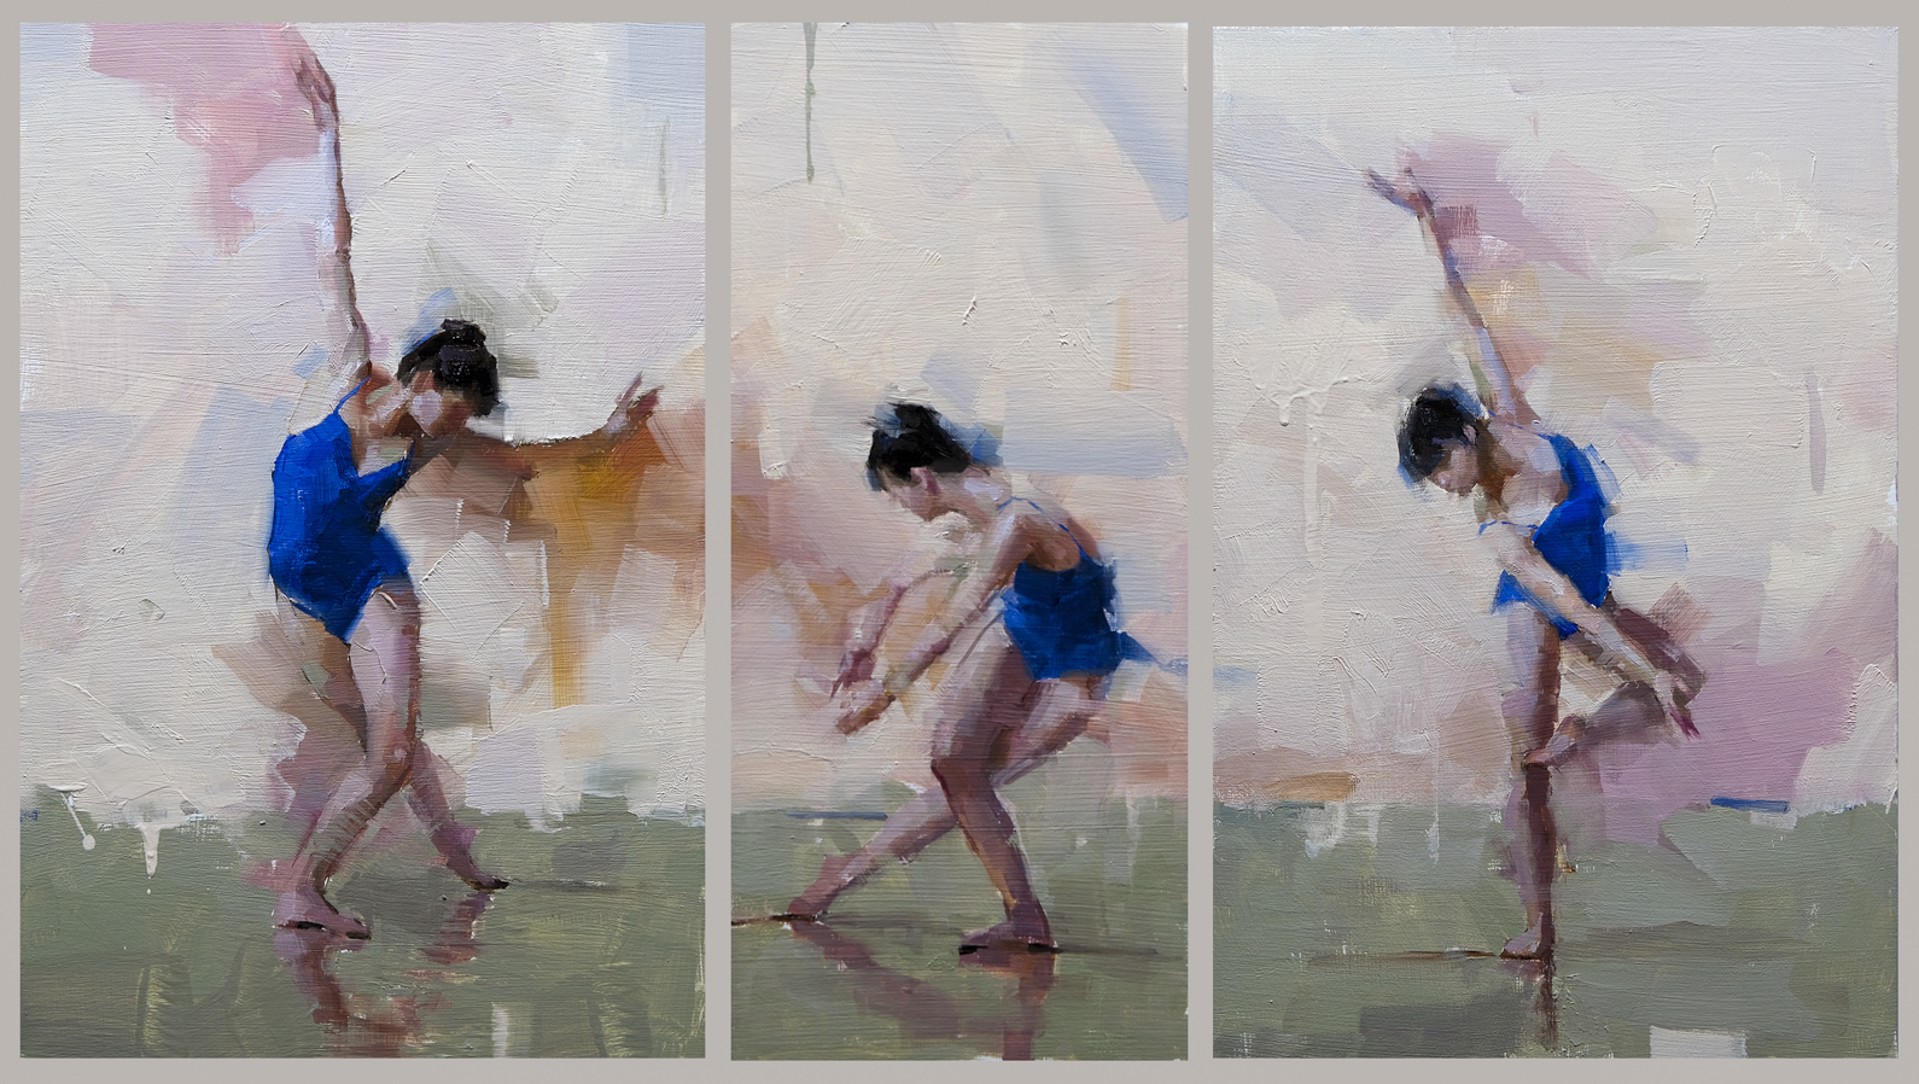 Triptych of a Dancer by Jacob Dhein